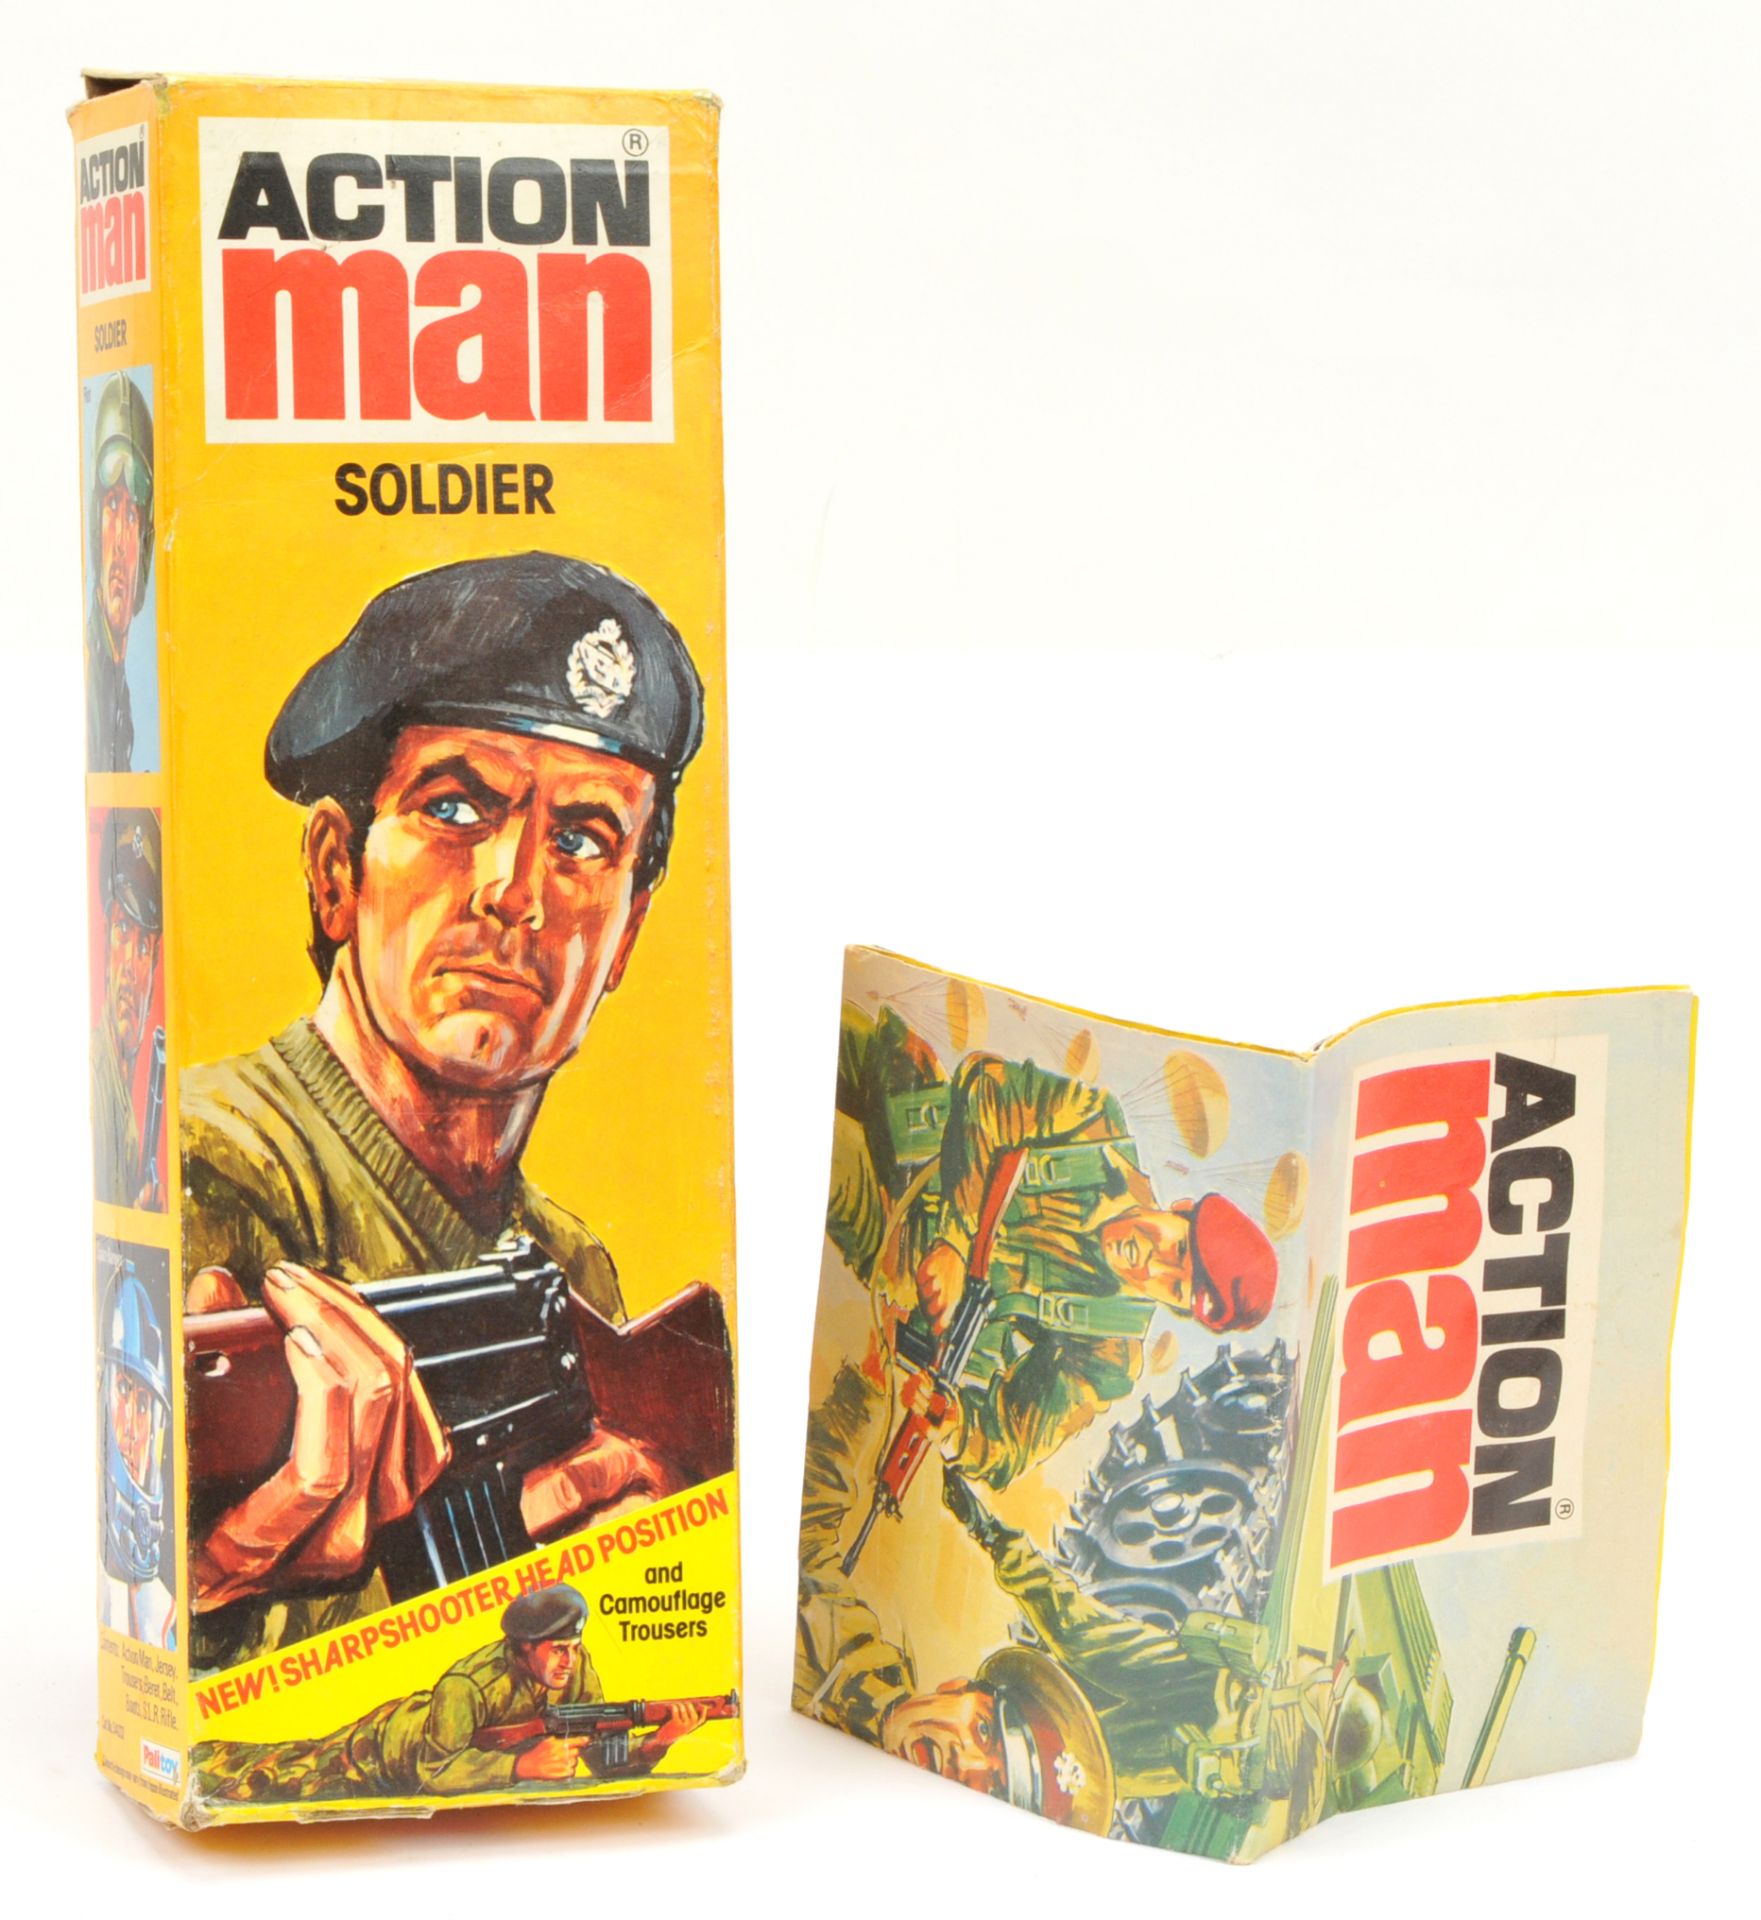 Palitoy Action Man EMPTY Soldier box. Condition is Fair Plus.